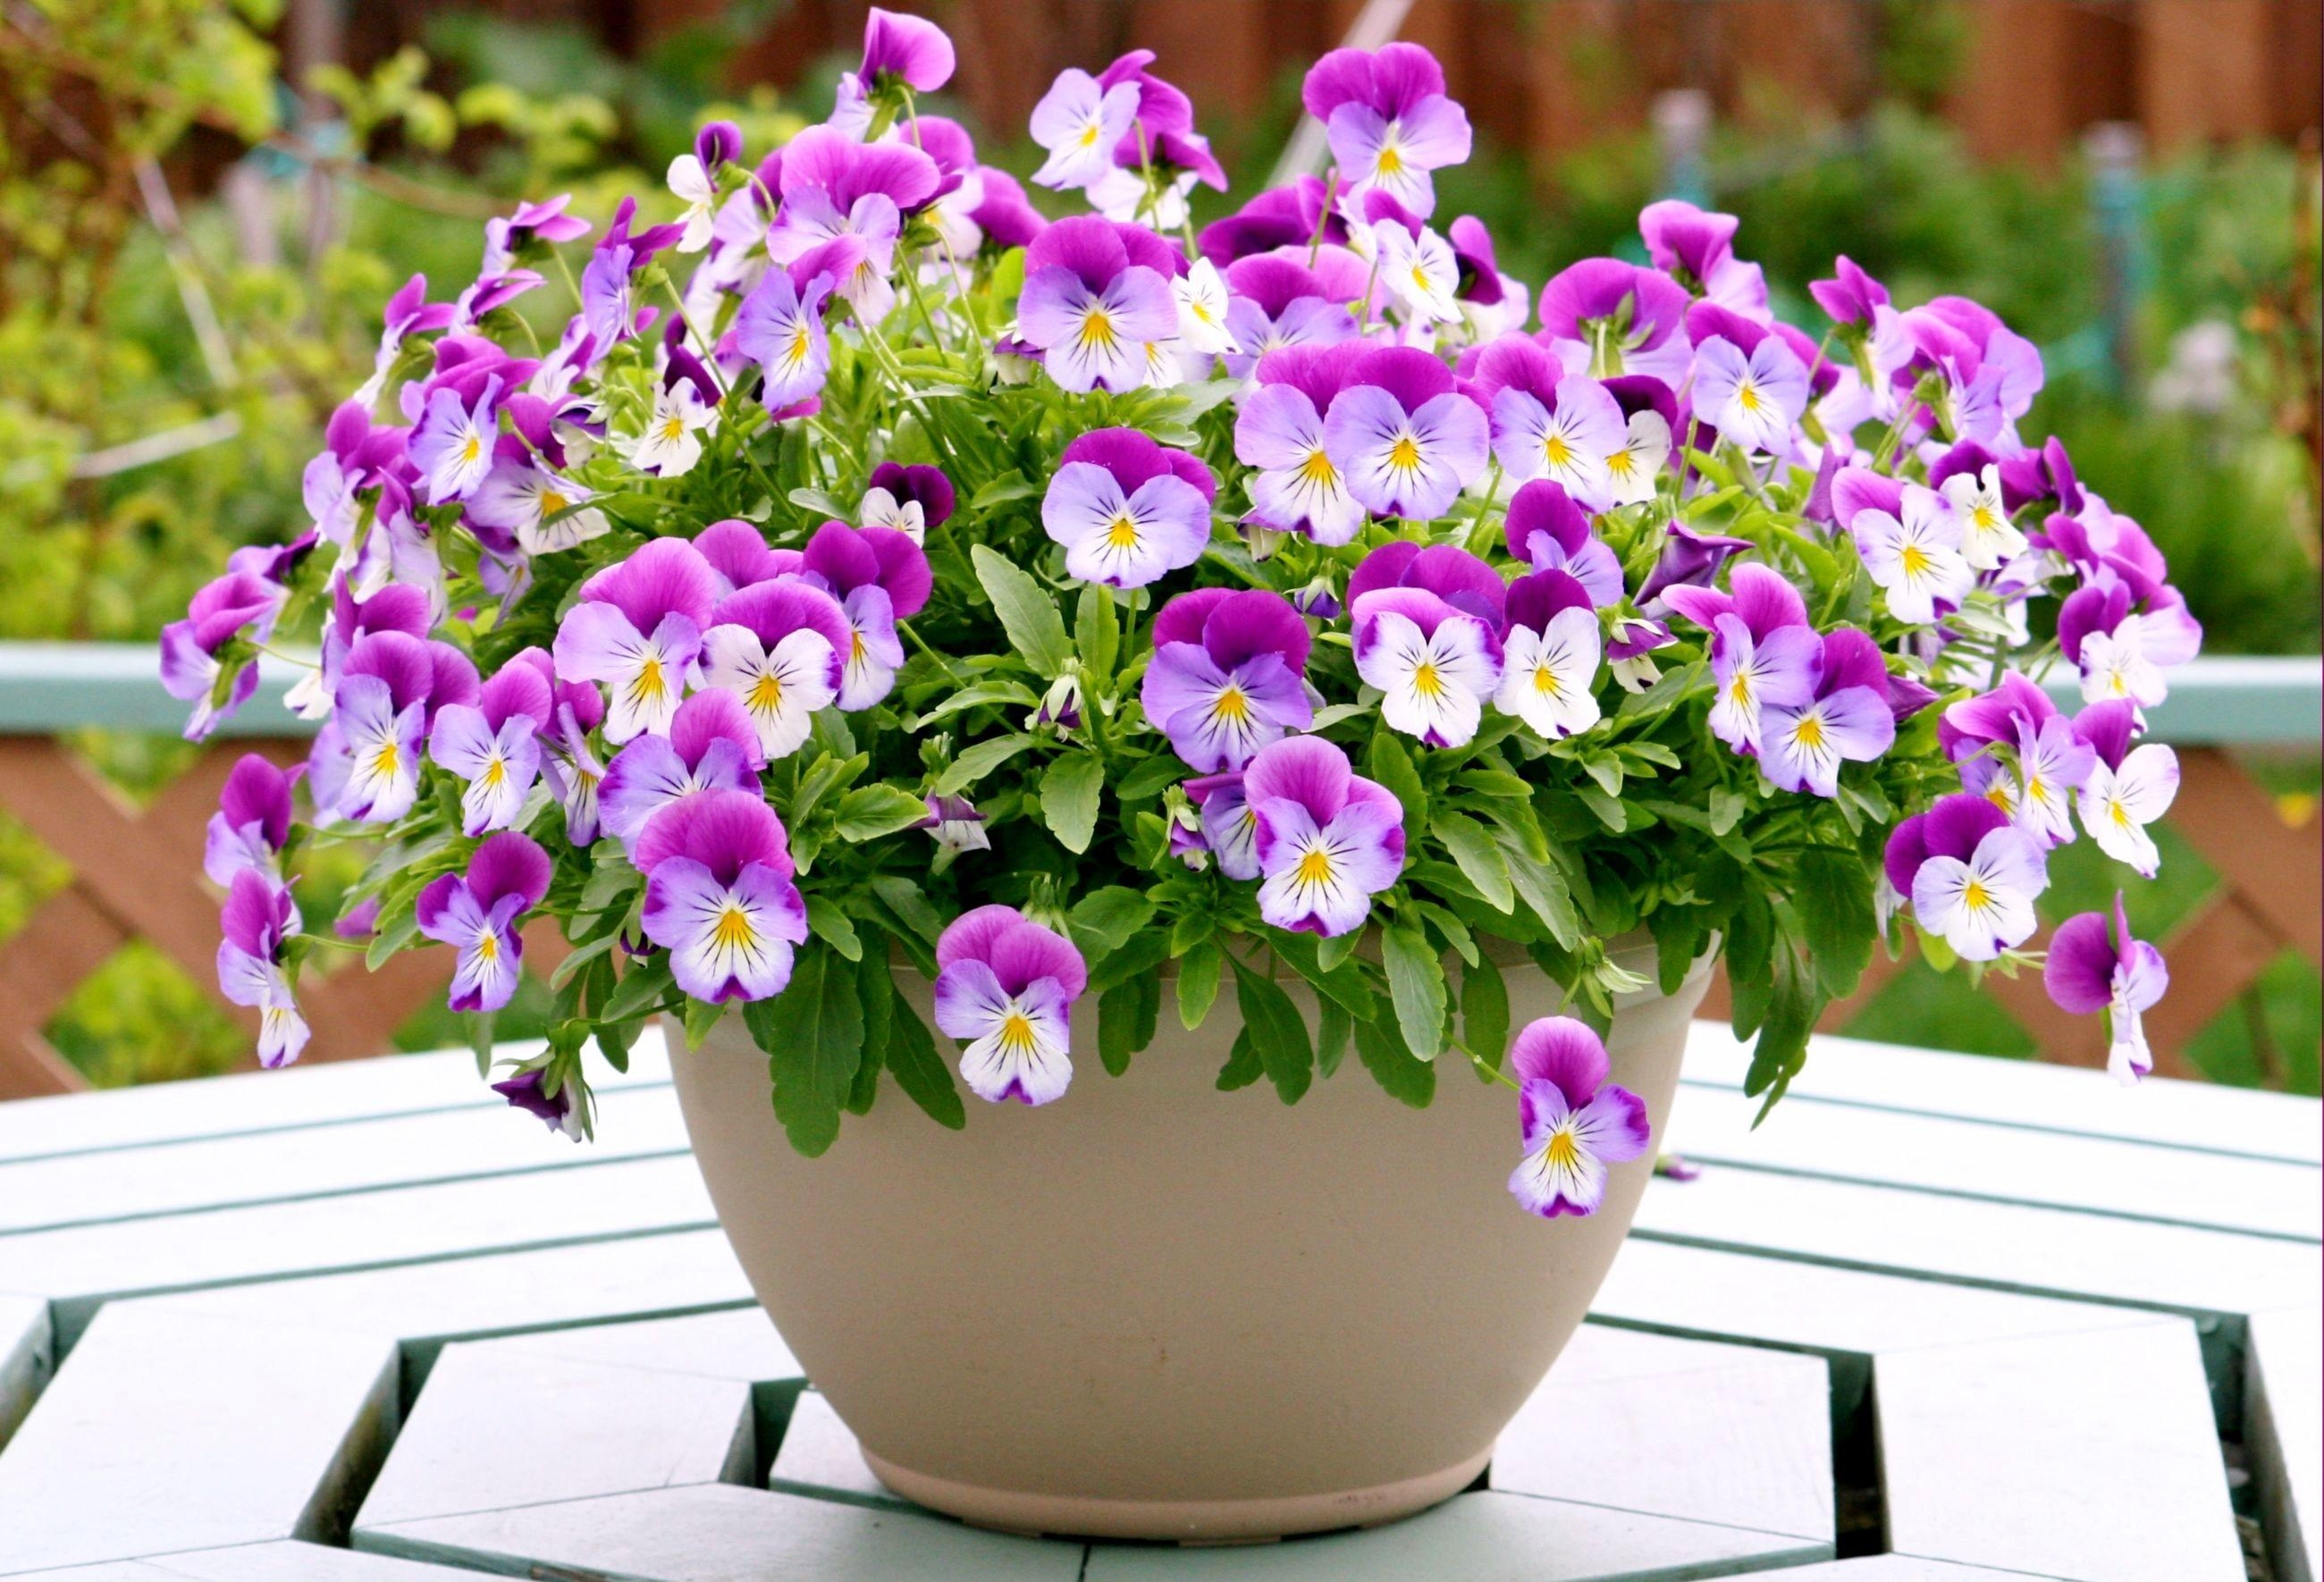 94268 download wallpaper flowers, pansies, table, pots, plant pot screensavers and pictures for free